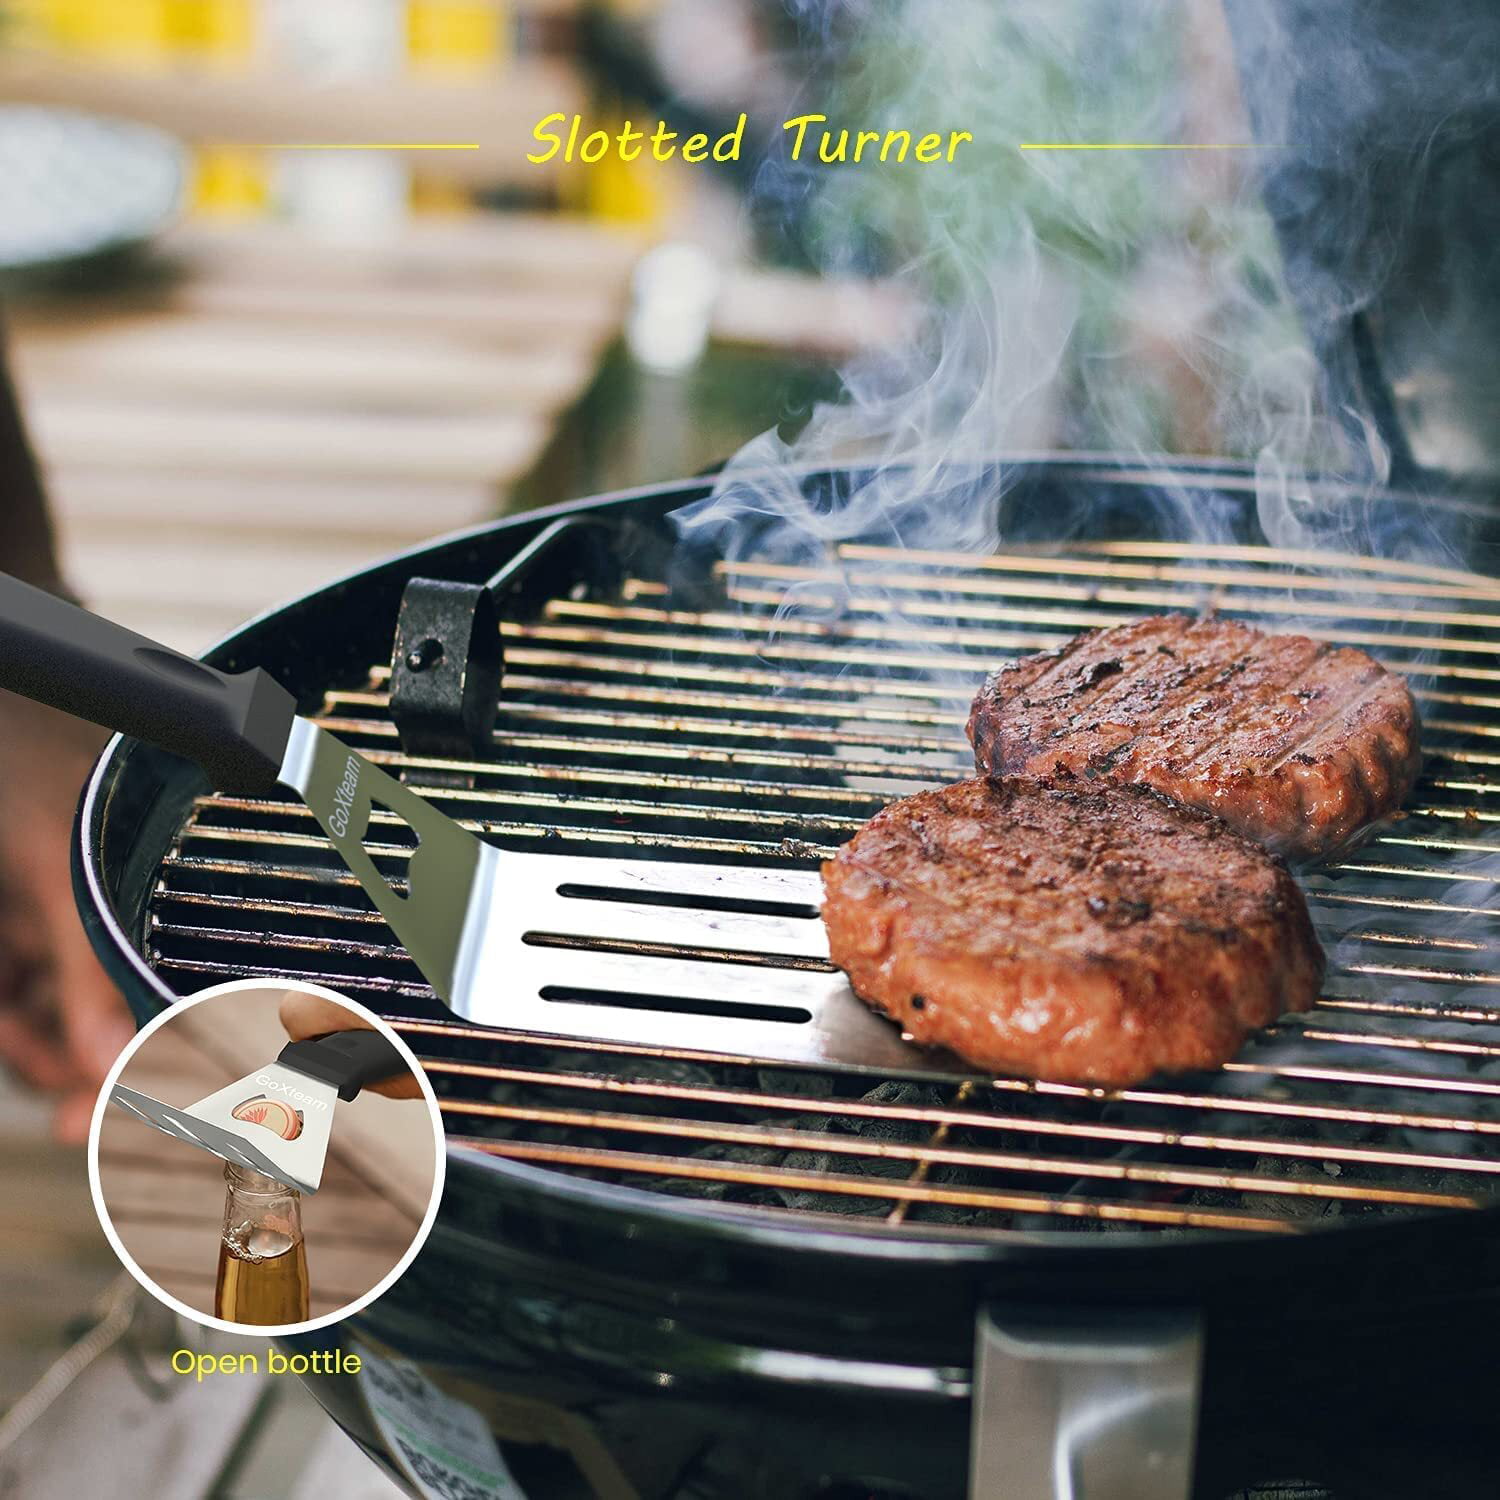 Grill Tools, Flat Top Grill Accessories For Blackstone And Camp